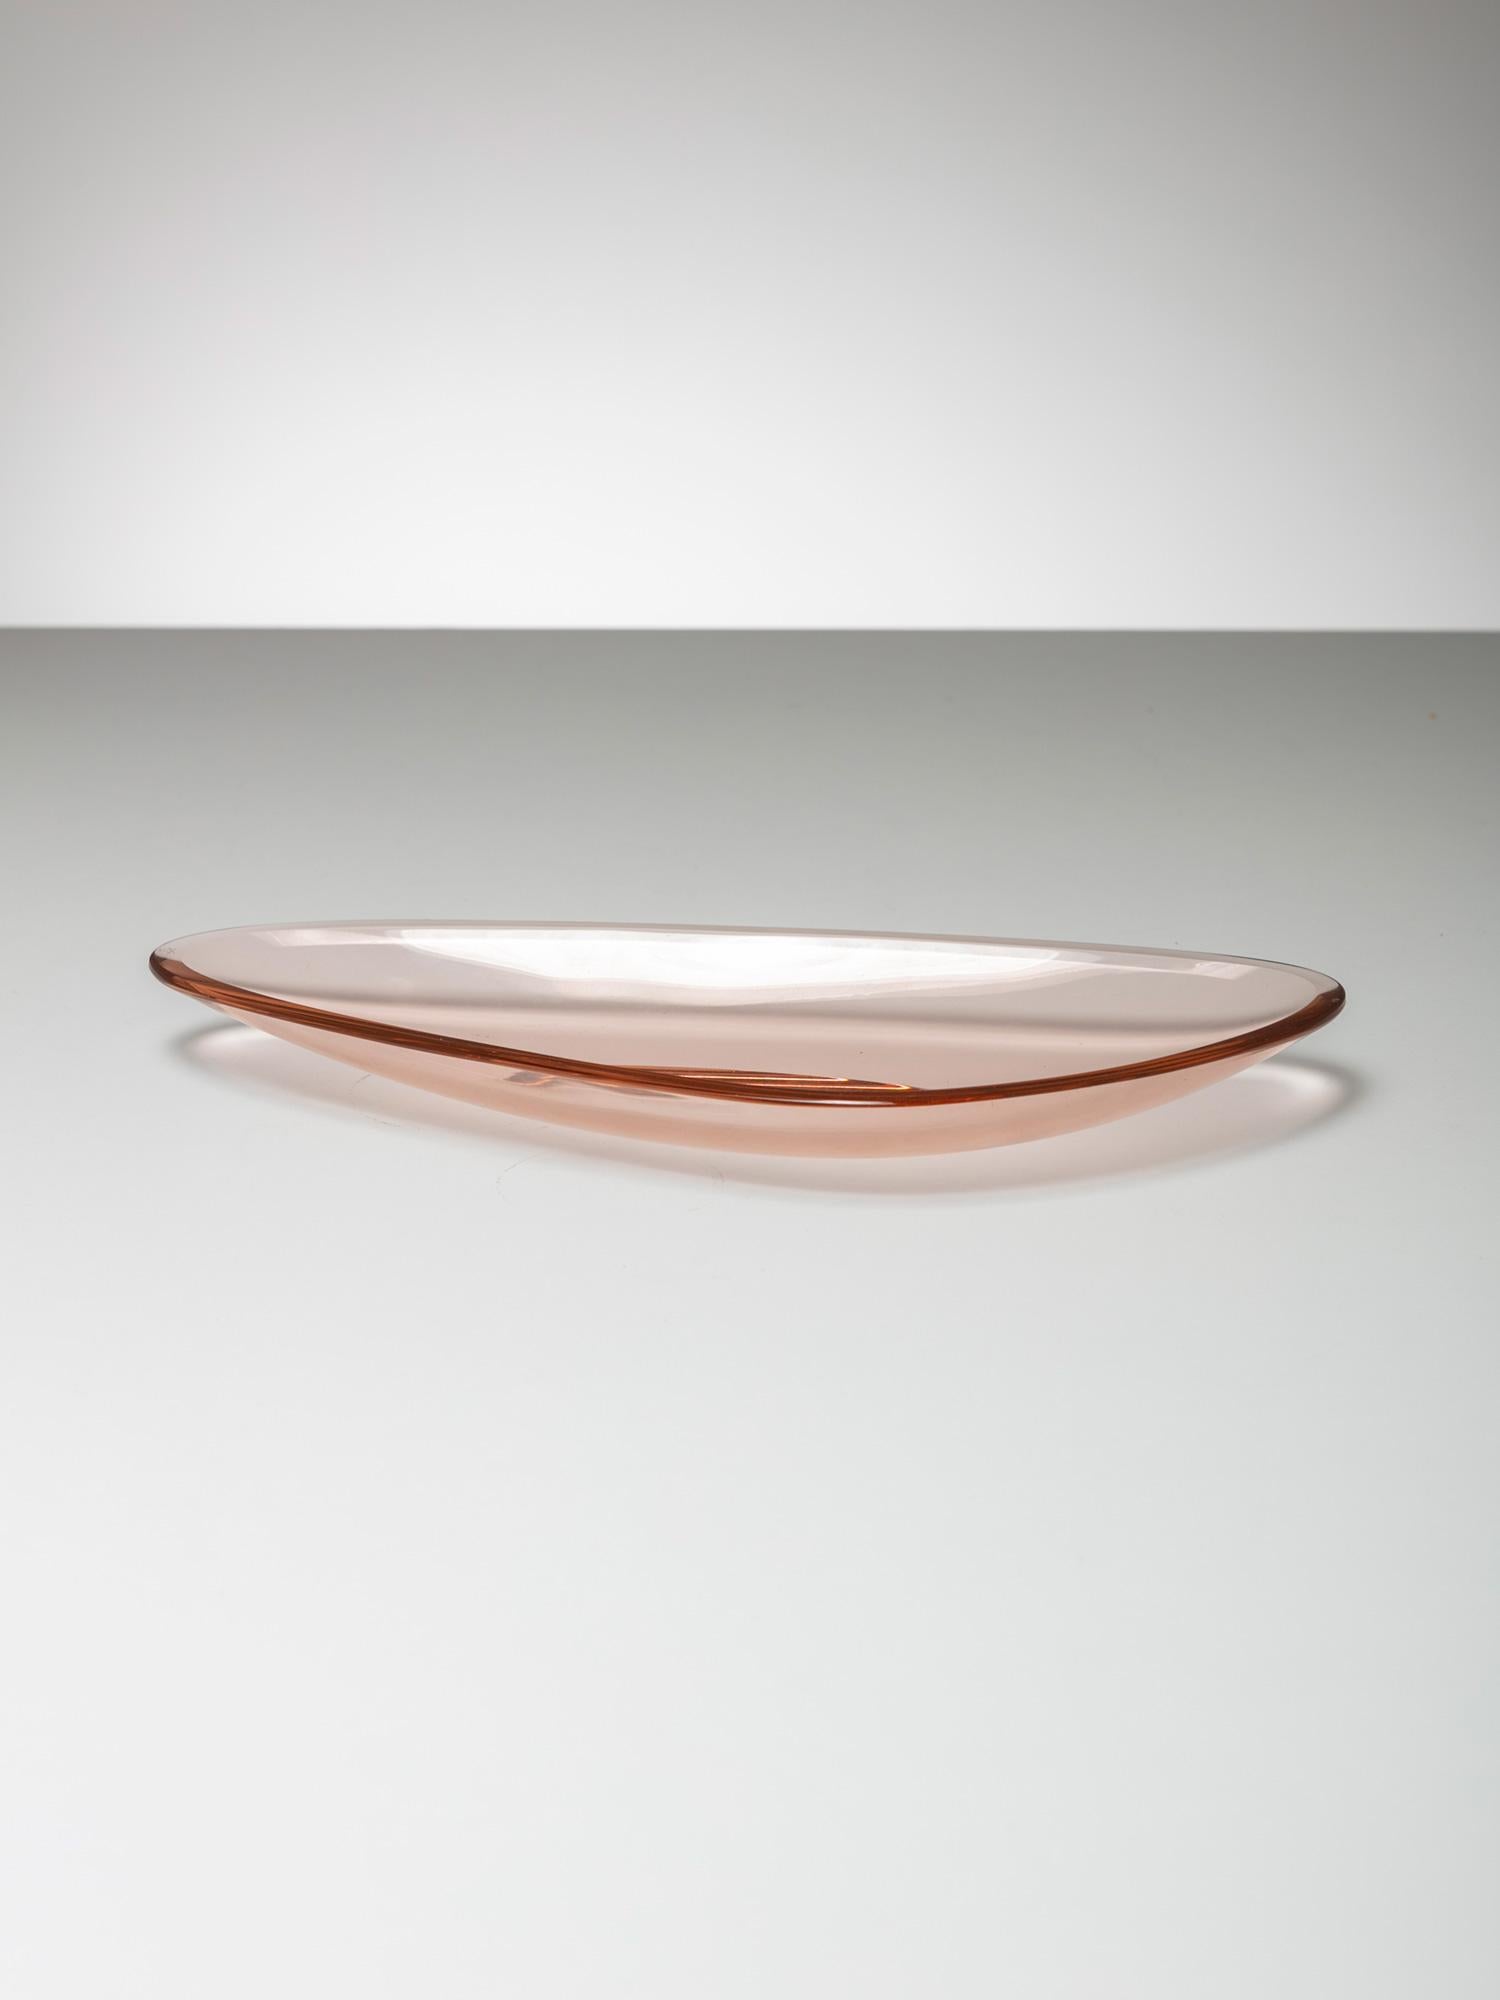 Model 1528 graceful pink tray by Fontana Arte.
Triangular shape with rounded corners.